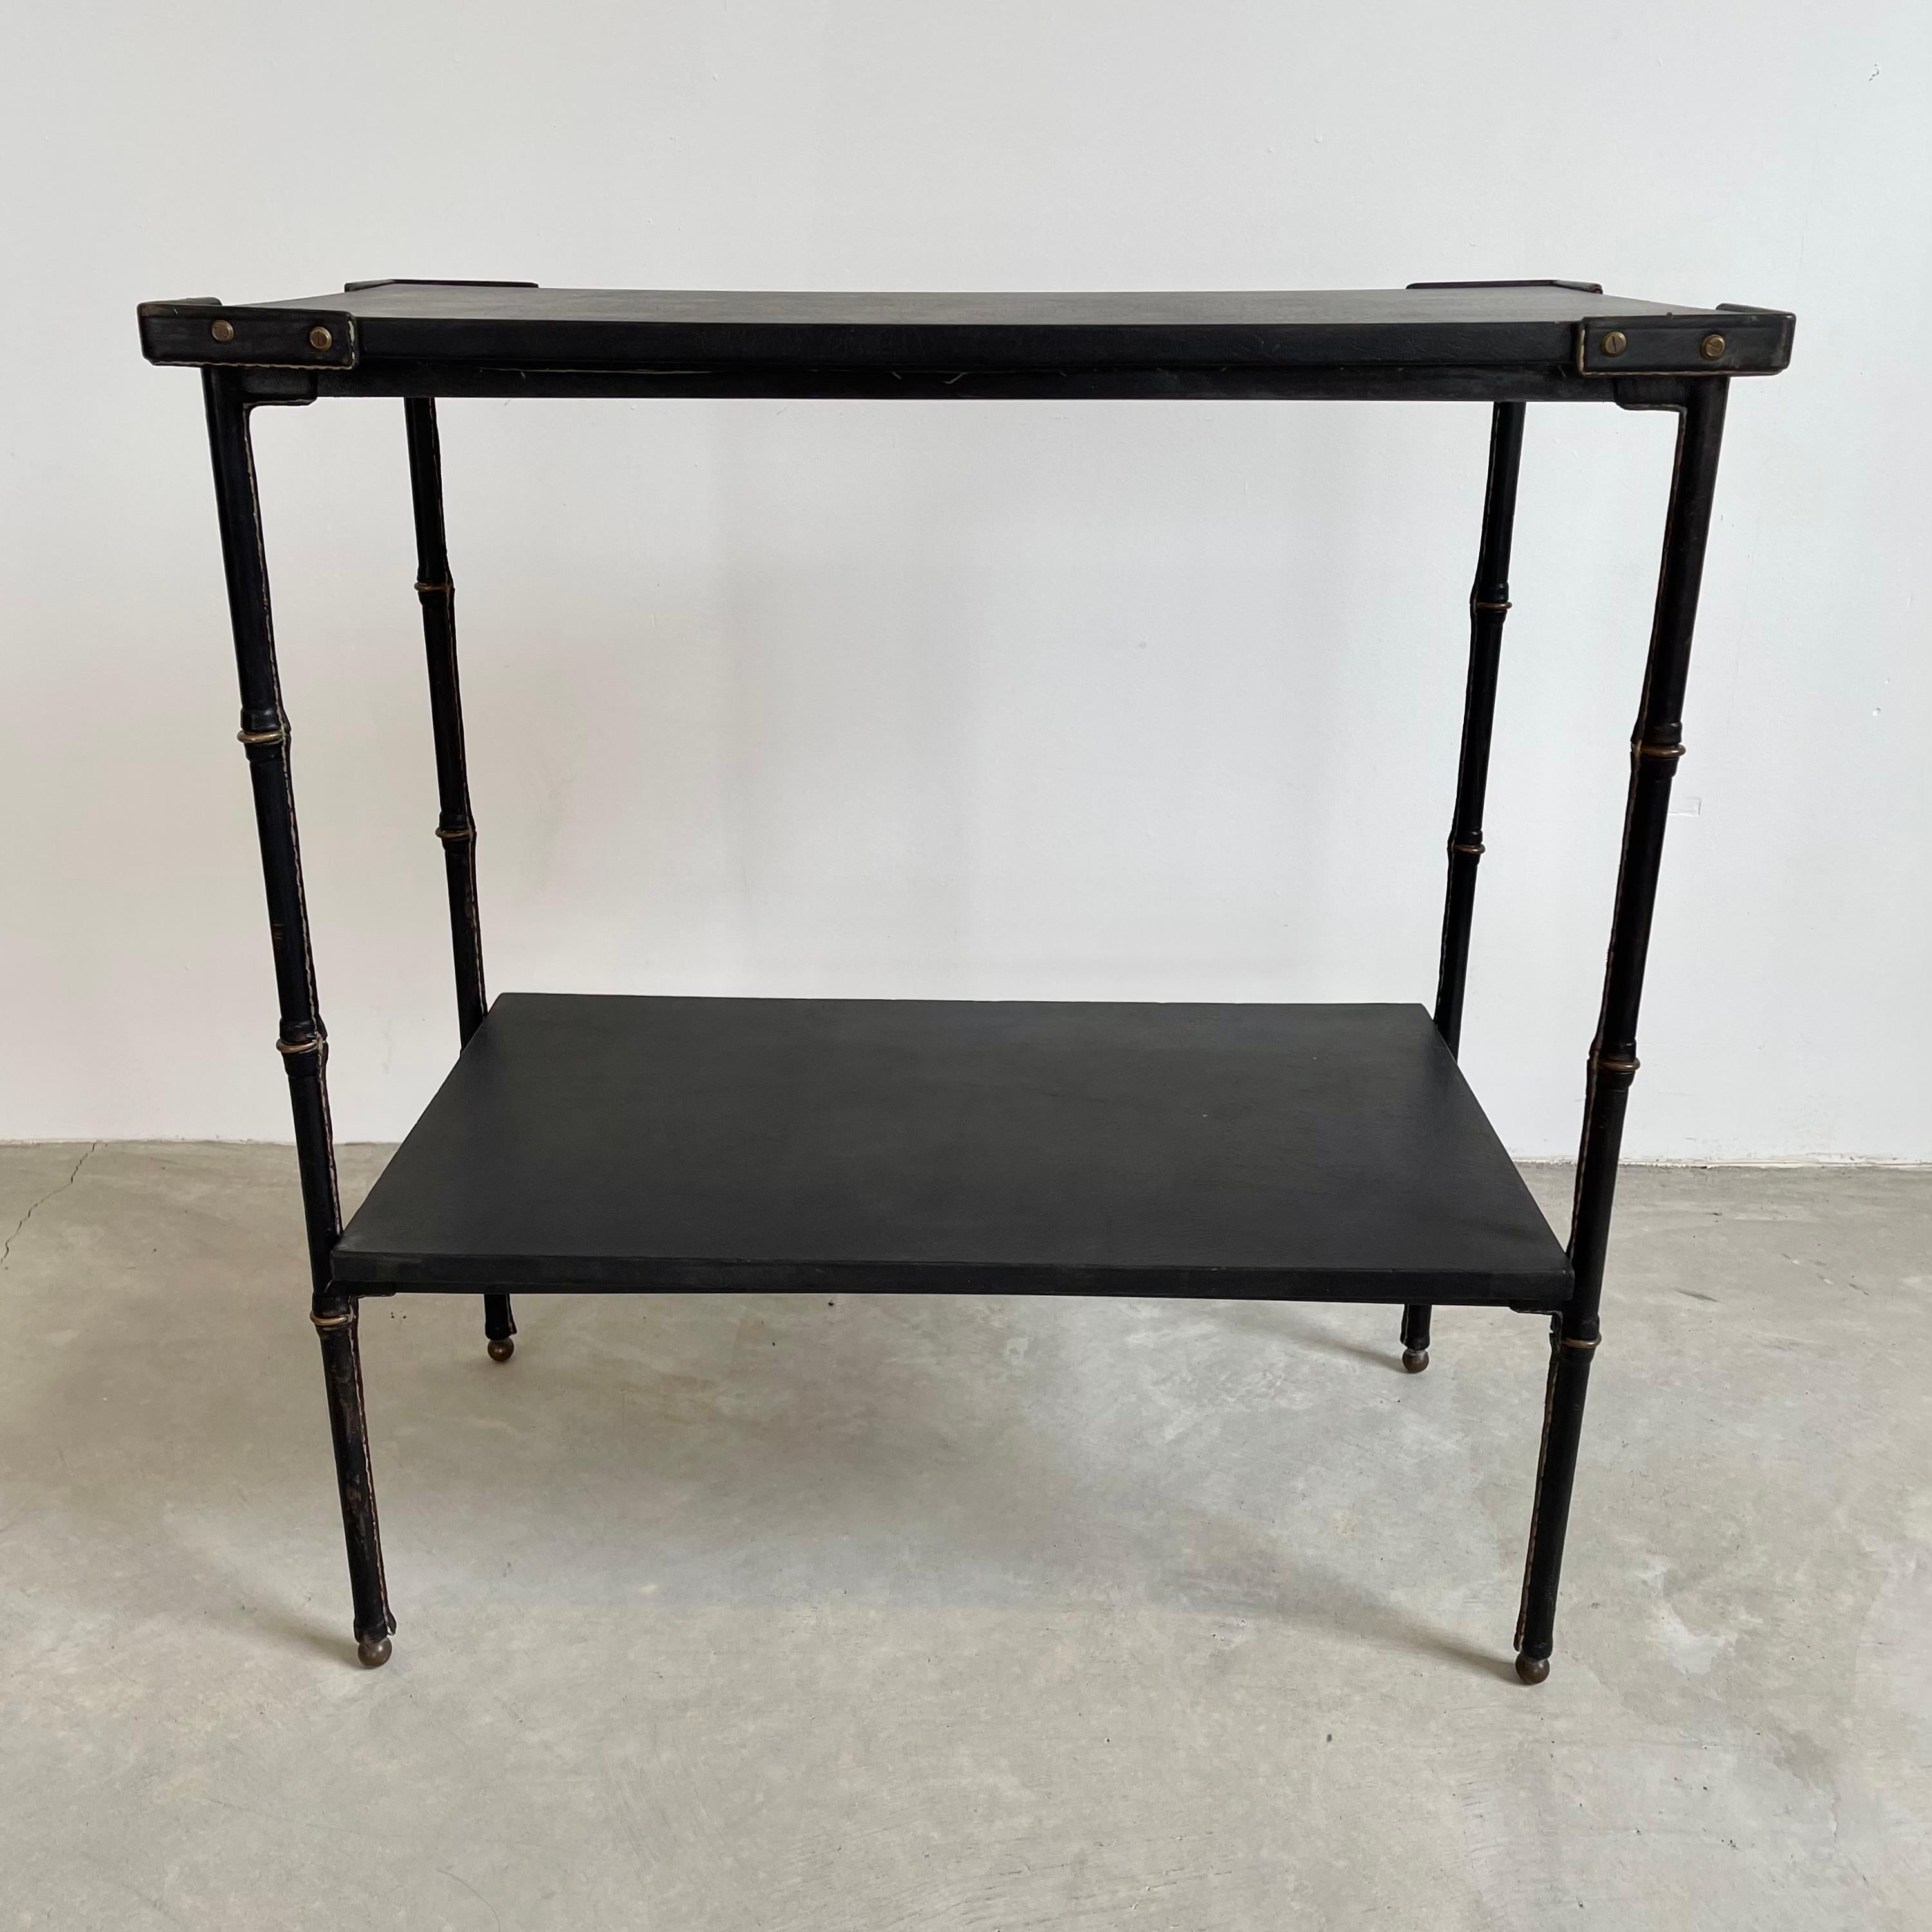 Large leather side table by French designer Jacques Adnet. Entirely wrapped in black saddle leather. Leather wrapped legs with brass detailing, and brass ball feet. Second leather shelf underneath making this piece great for storage. Tabletop edges